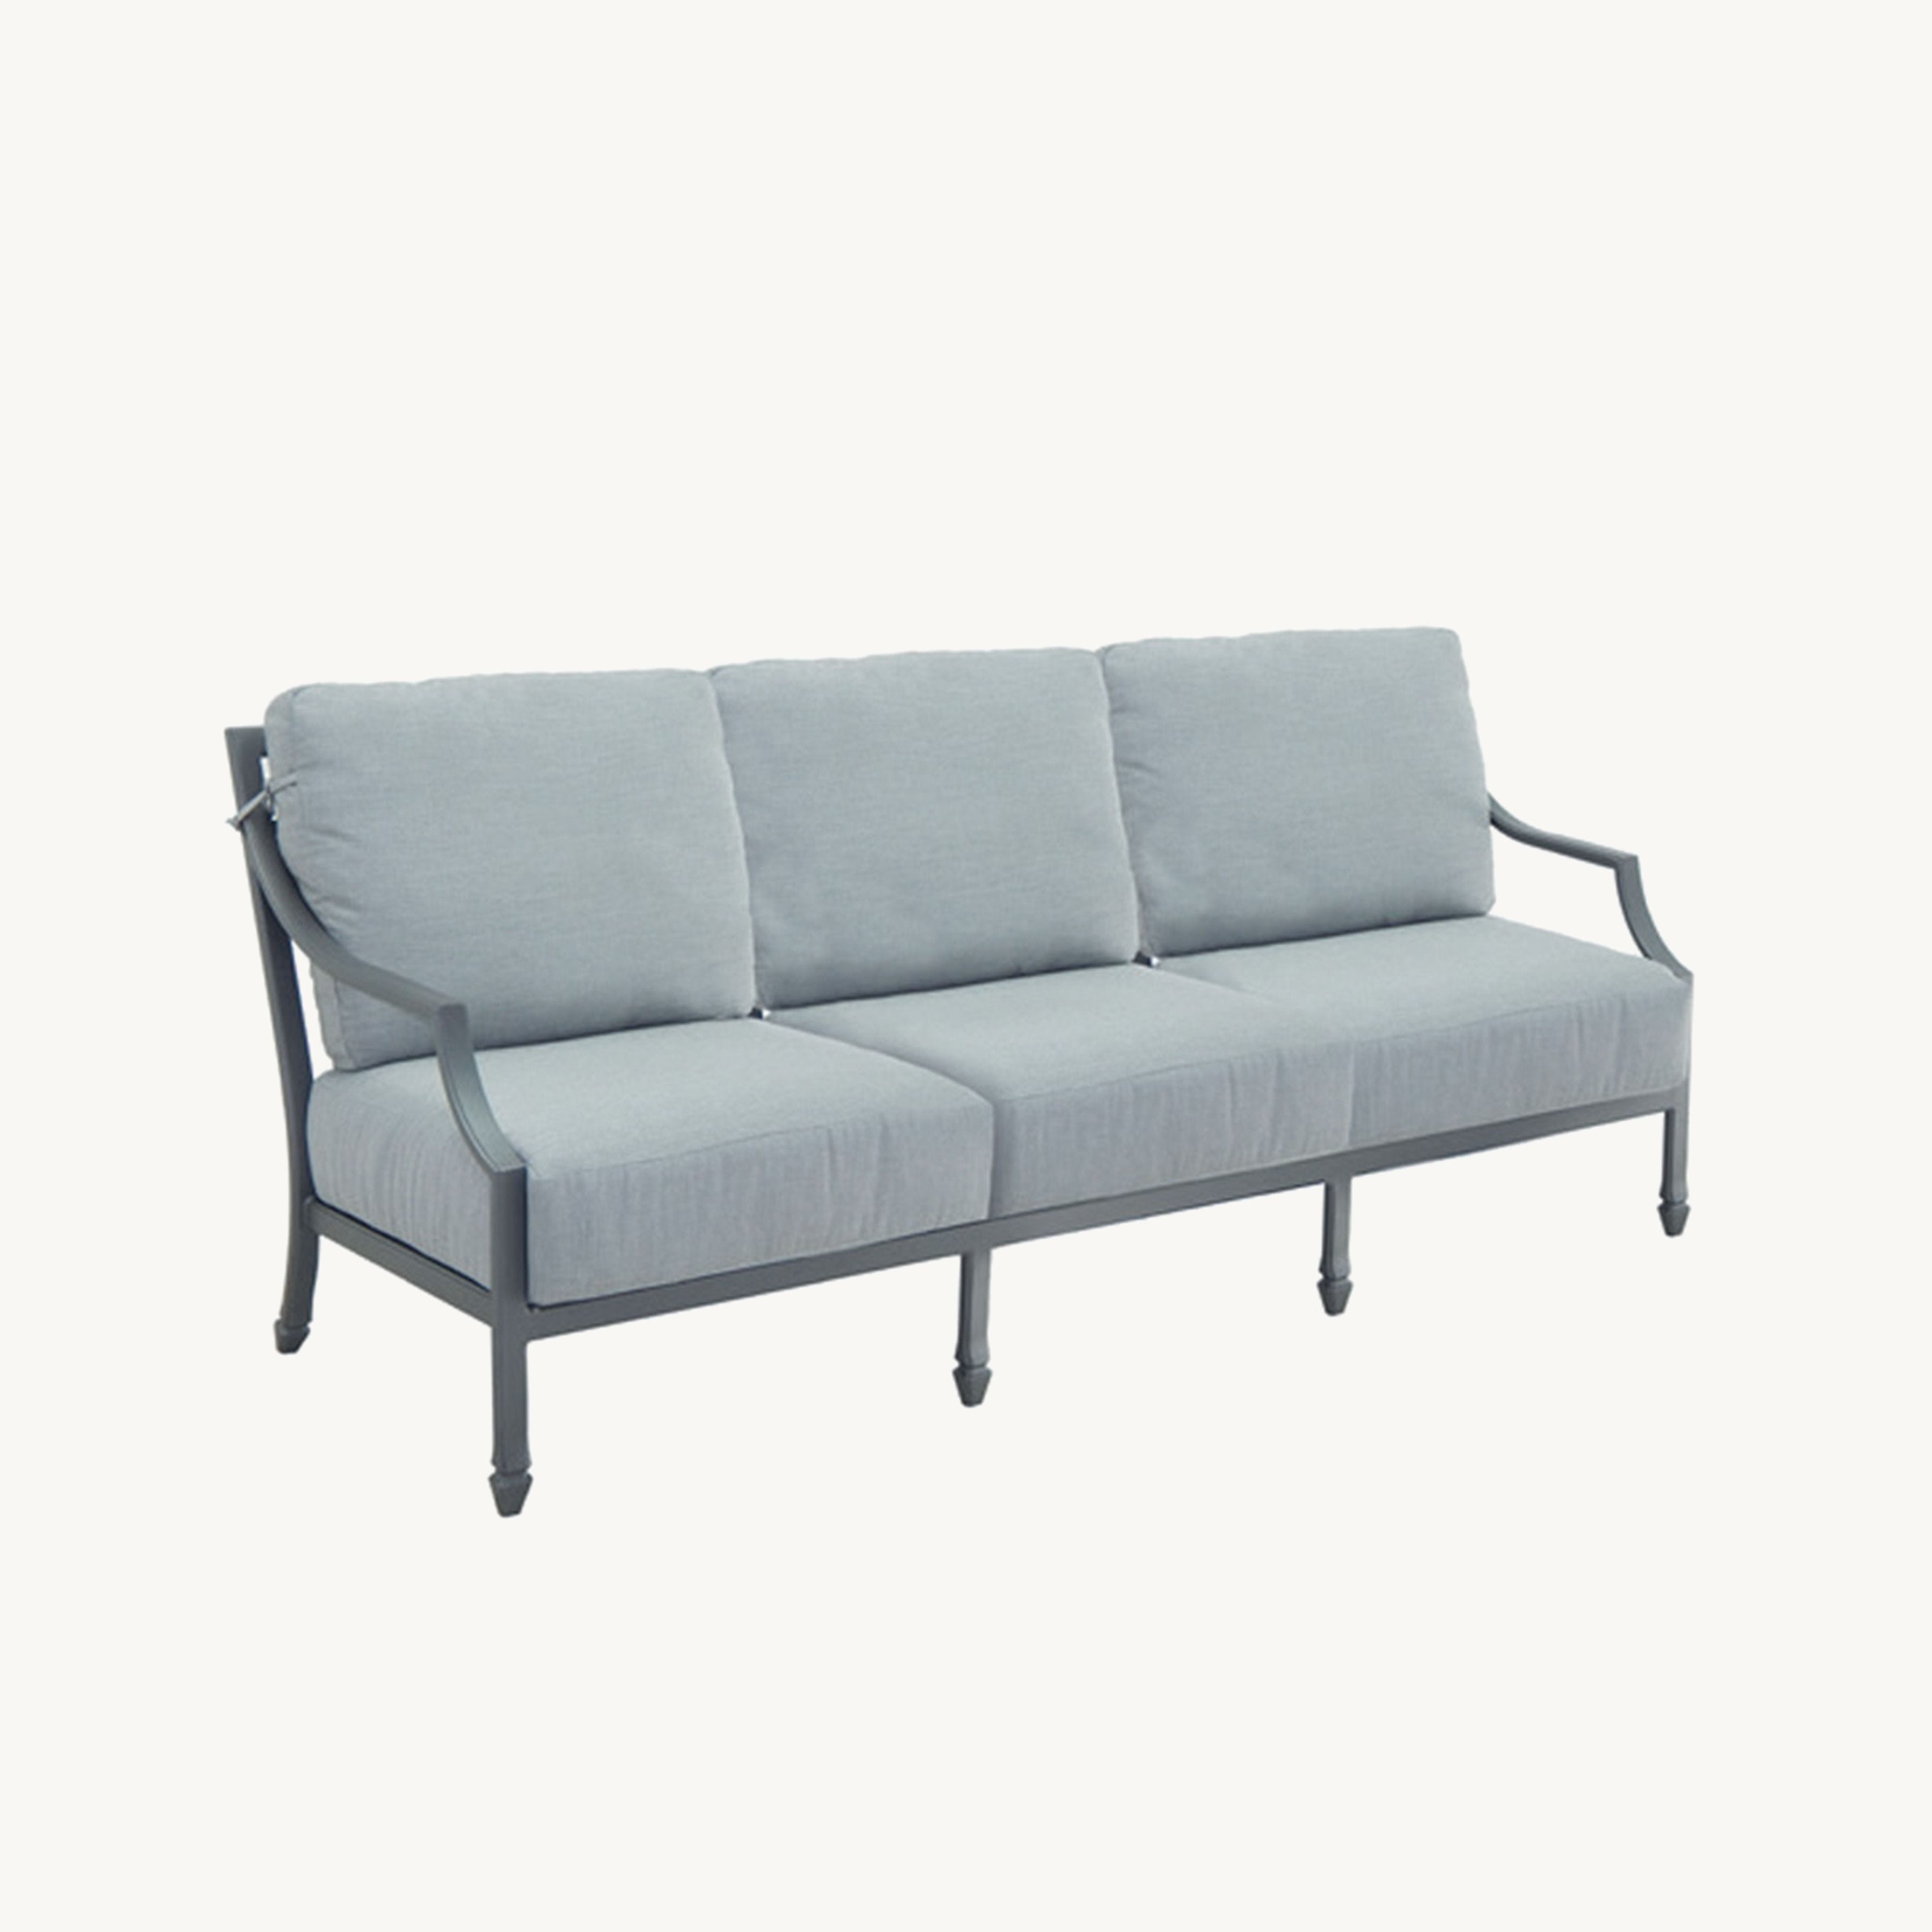 Lancaster Cushioned Sofa By Castelle